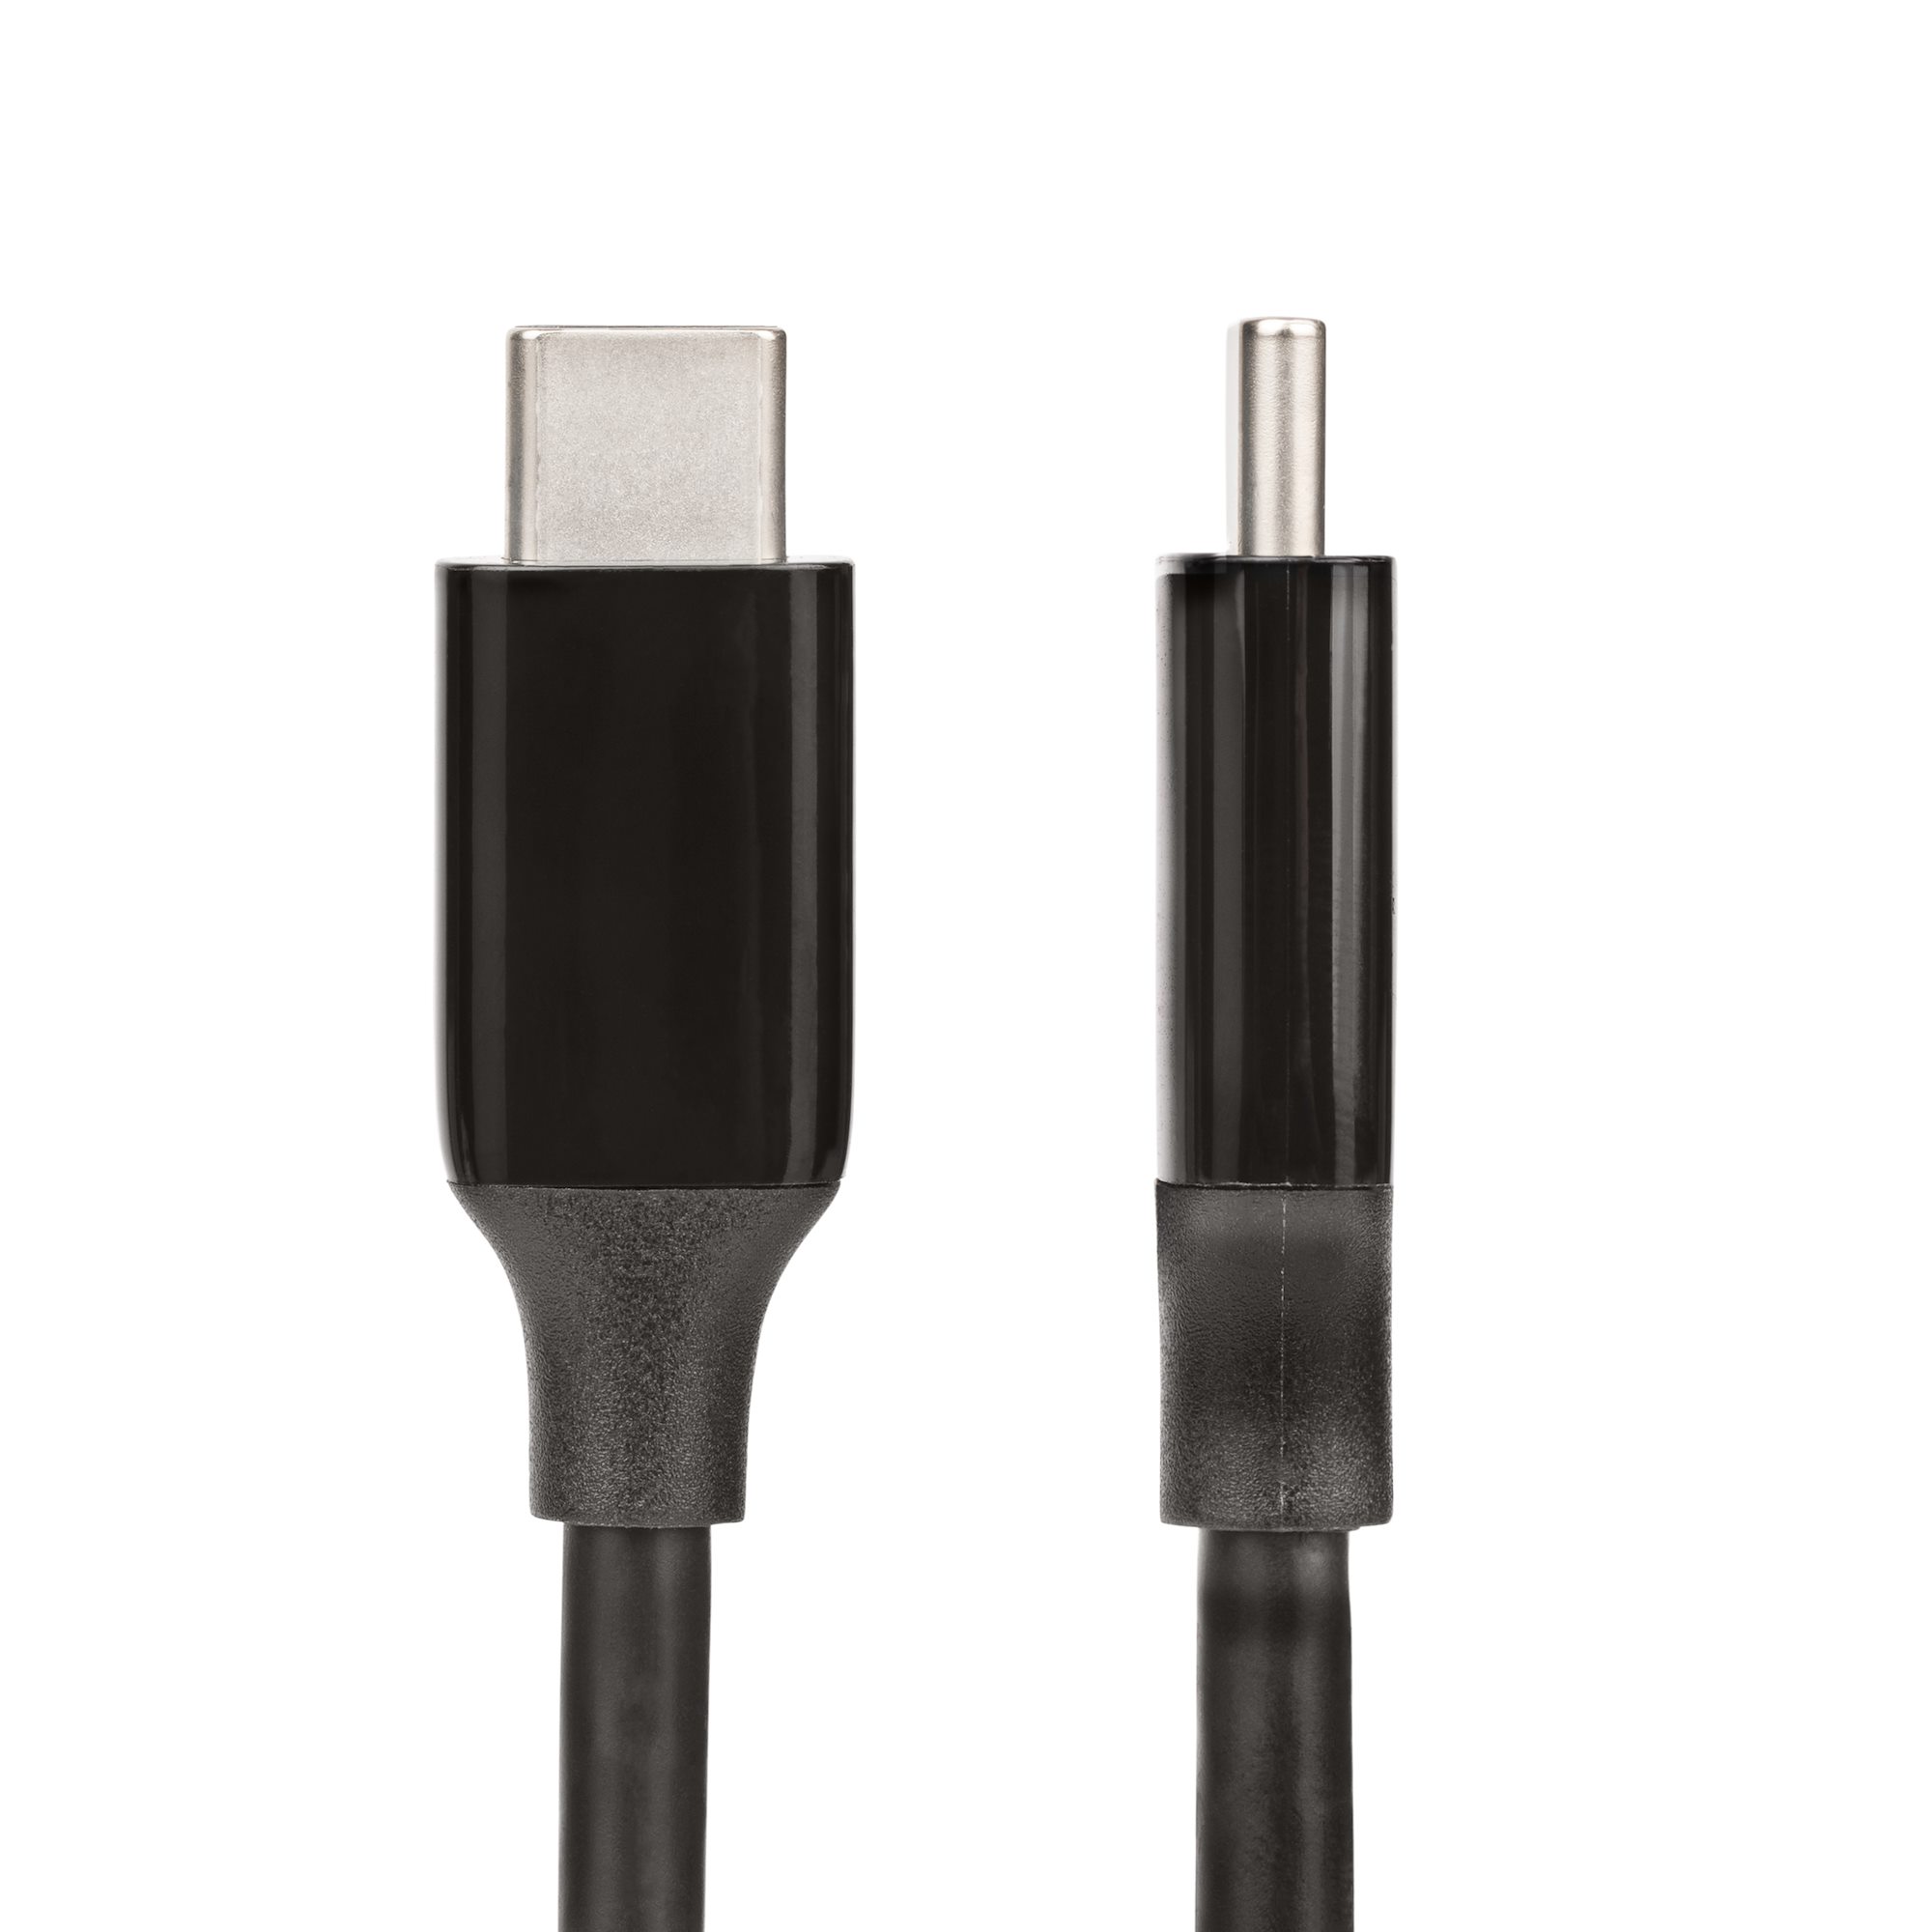 10ft (3m) USB 3.0 (USB 3.1 Gen 1) USB-C to USB Micro-B Cable M/M - Black, USB-C Cables, USB-C Cables, Adapters, and Hubs